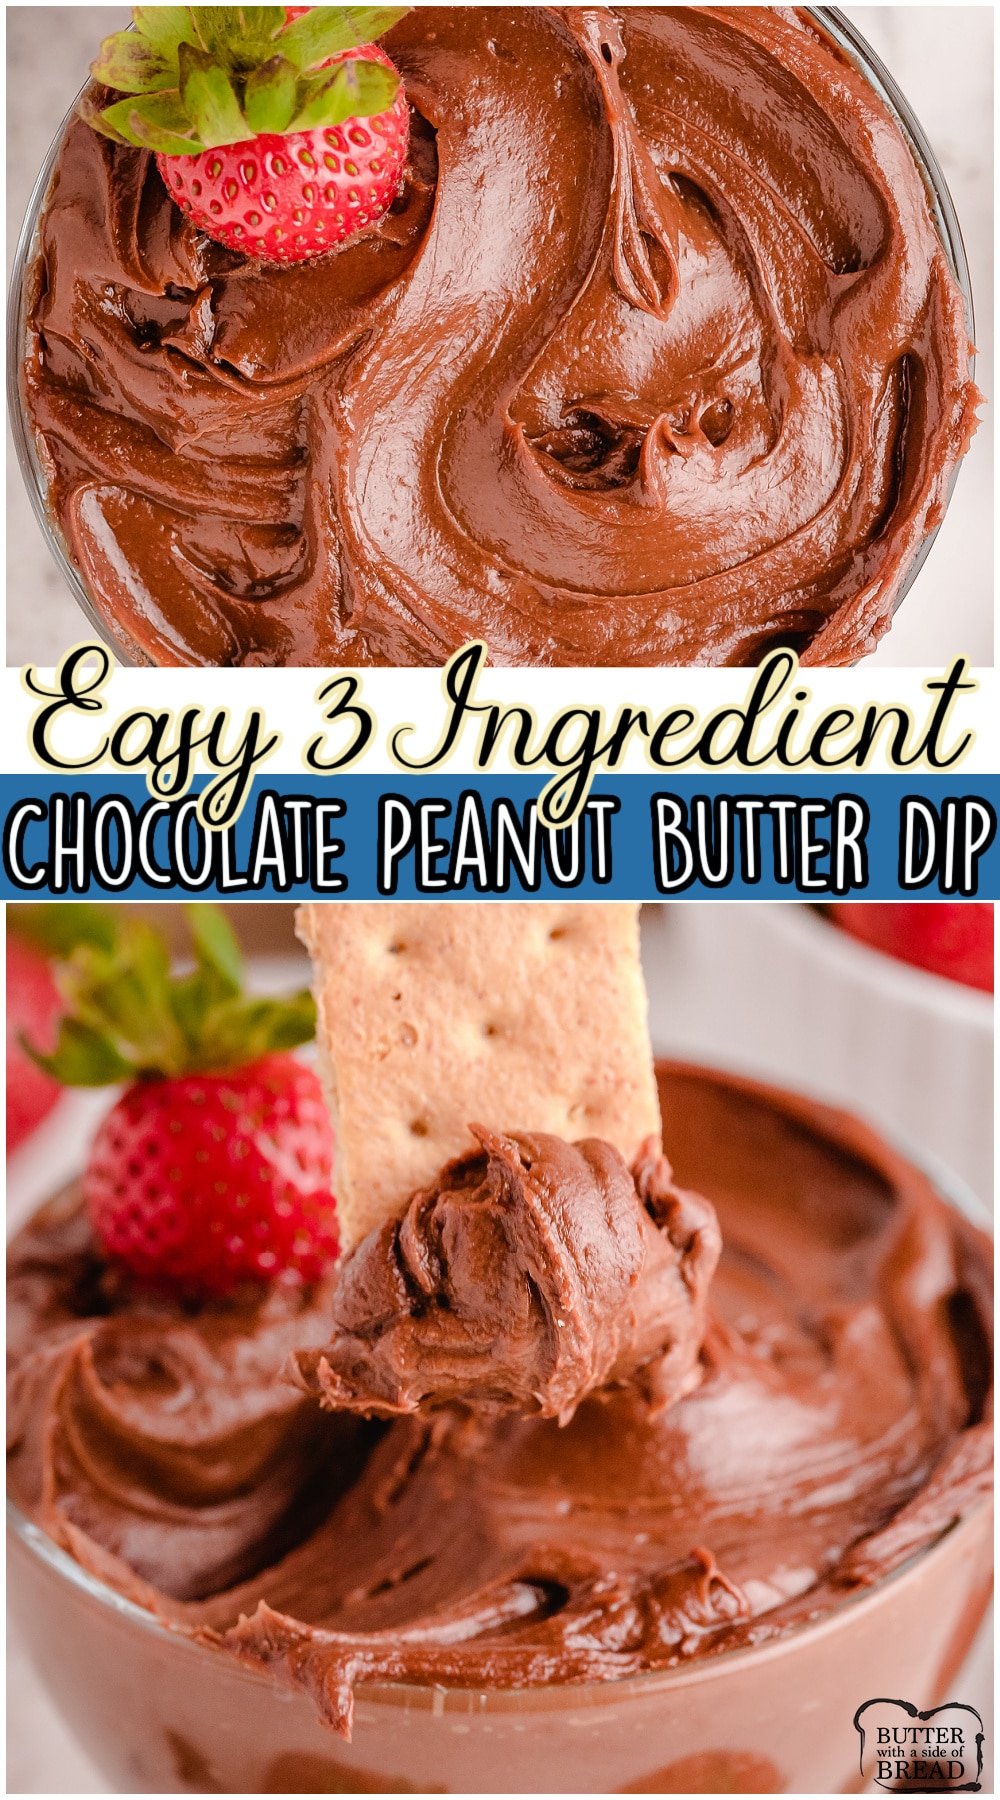 Quick & easy Chocolate Peanut Butter Dip recipe made in minutes & so tasty! Made with just 3 ingredients, this recipe is perfect for snacking or parties as everyone loves it!